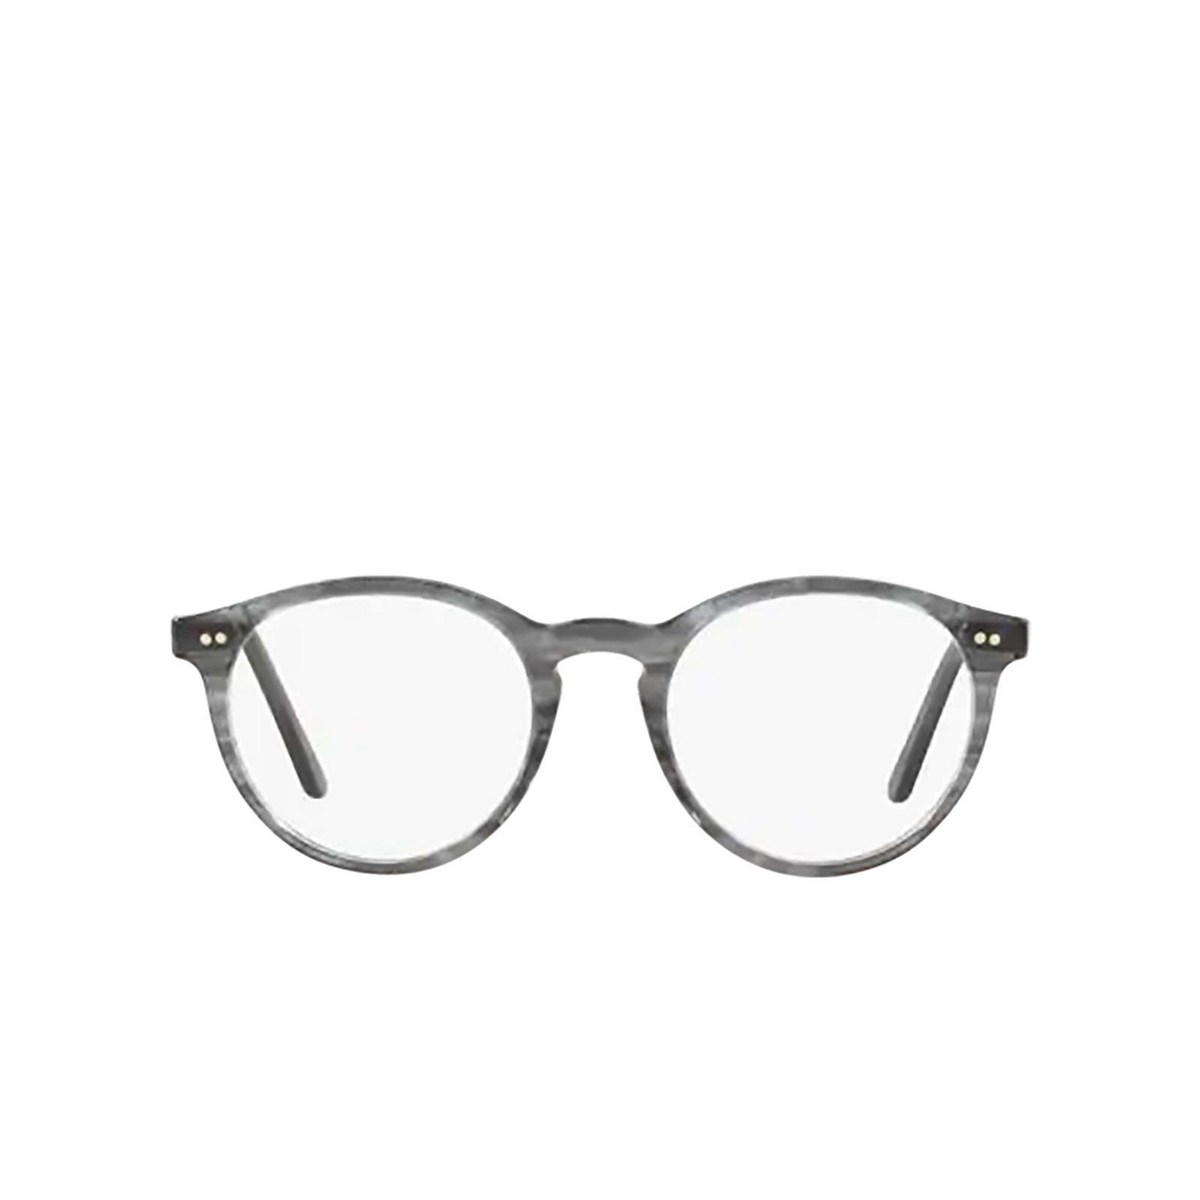 Polo Ralph Lauren® Round Eyeglasses: PH2083 color Shiny Striped Grey 5821 - front view.